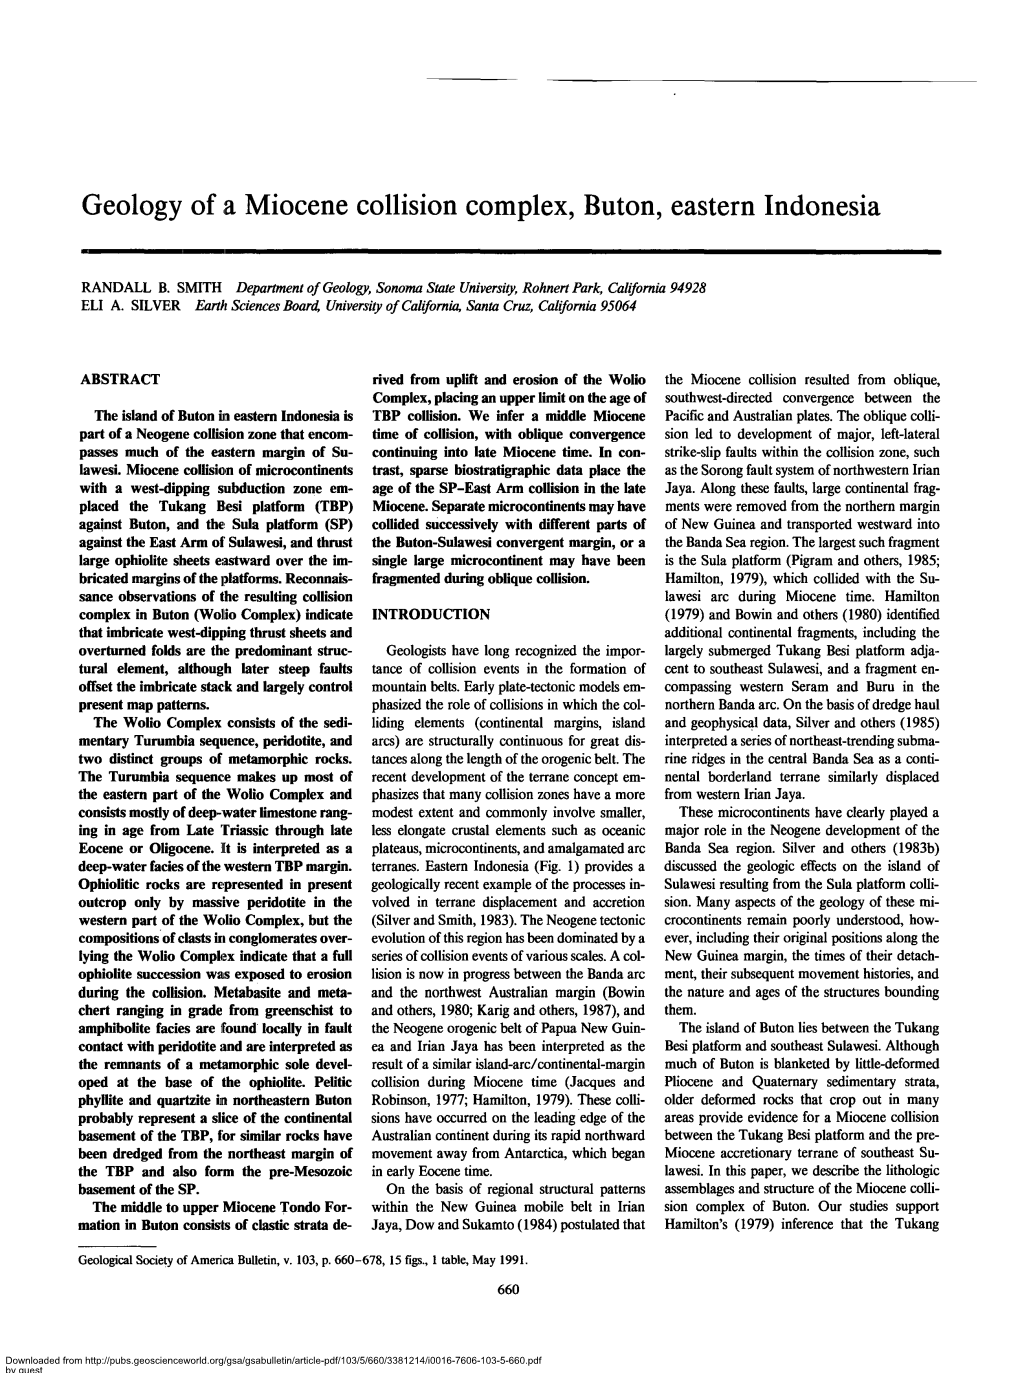 Geology of a Miocene Collision Complex, Buton, Eastern Indonesia